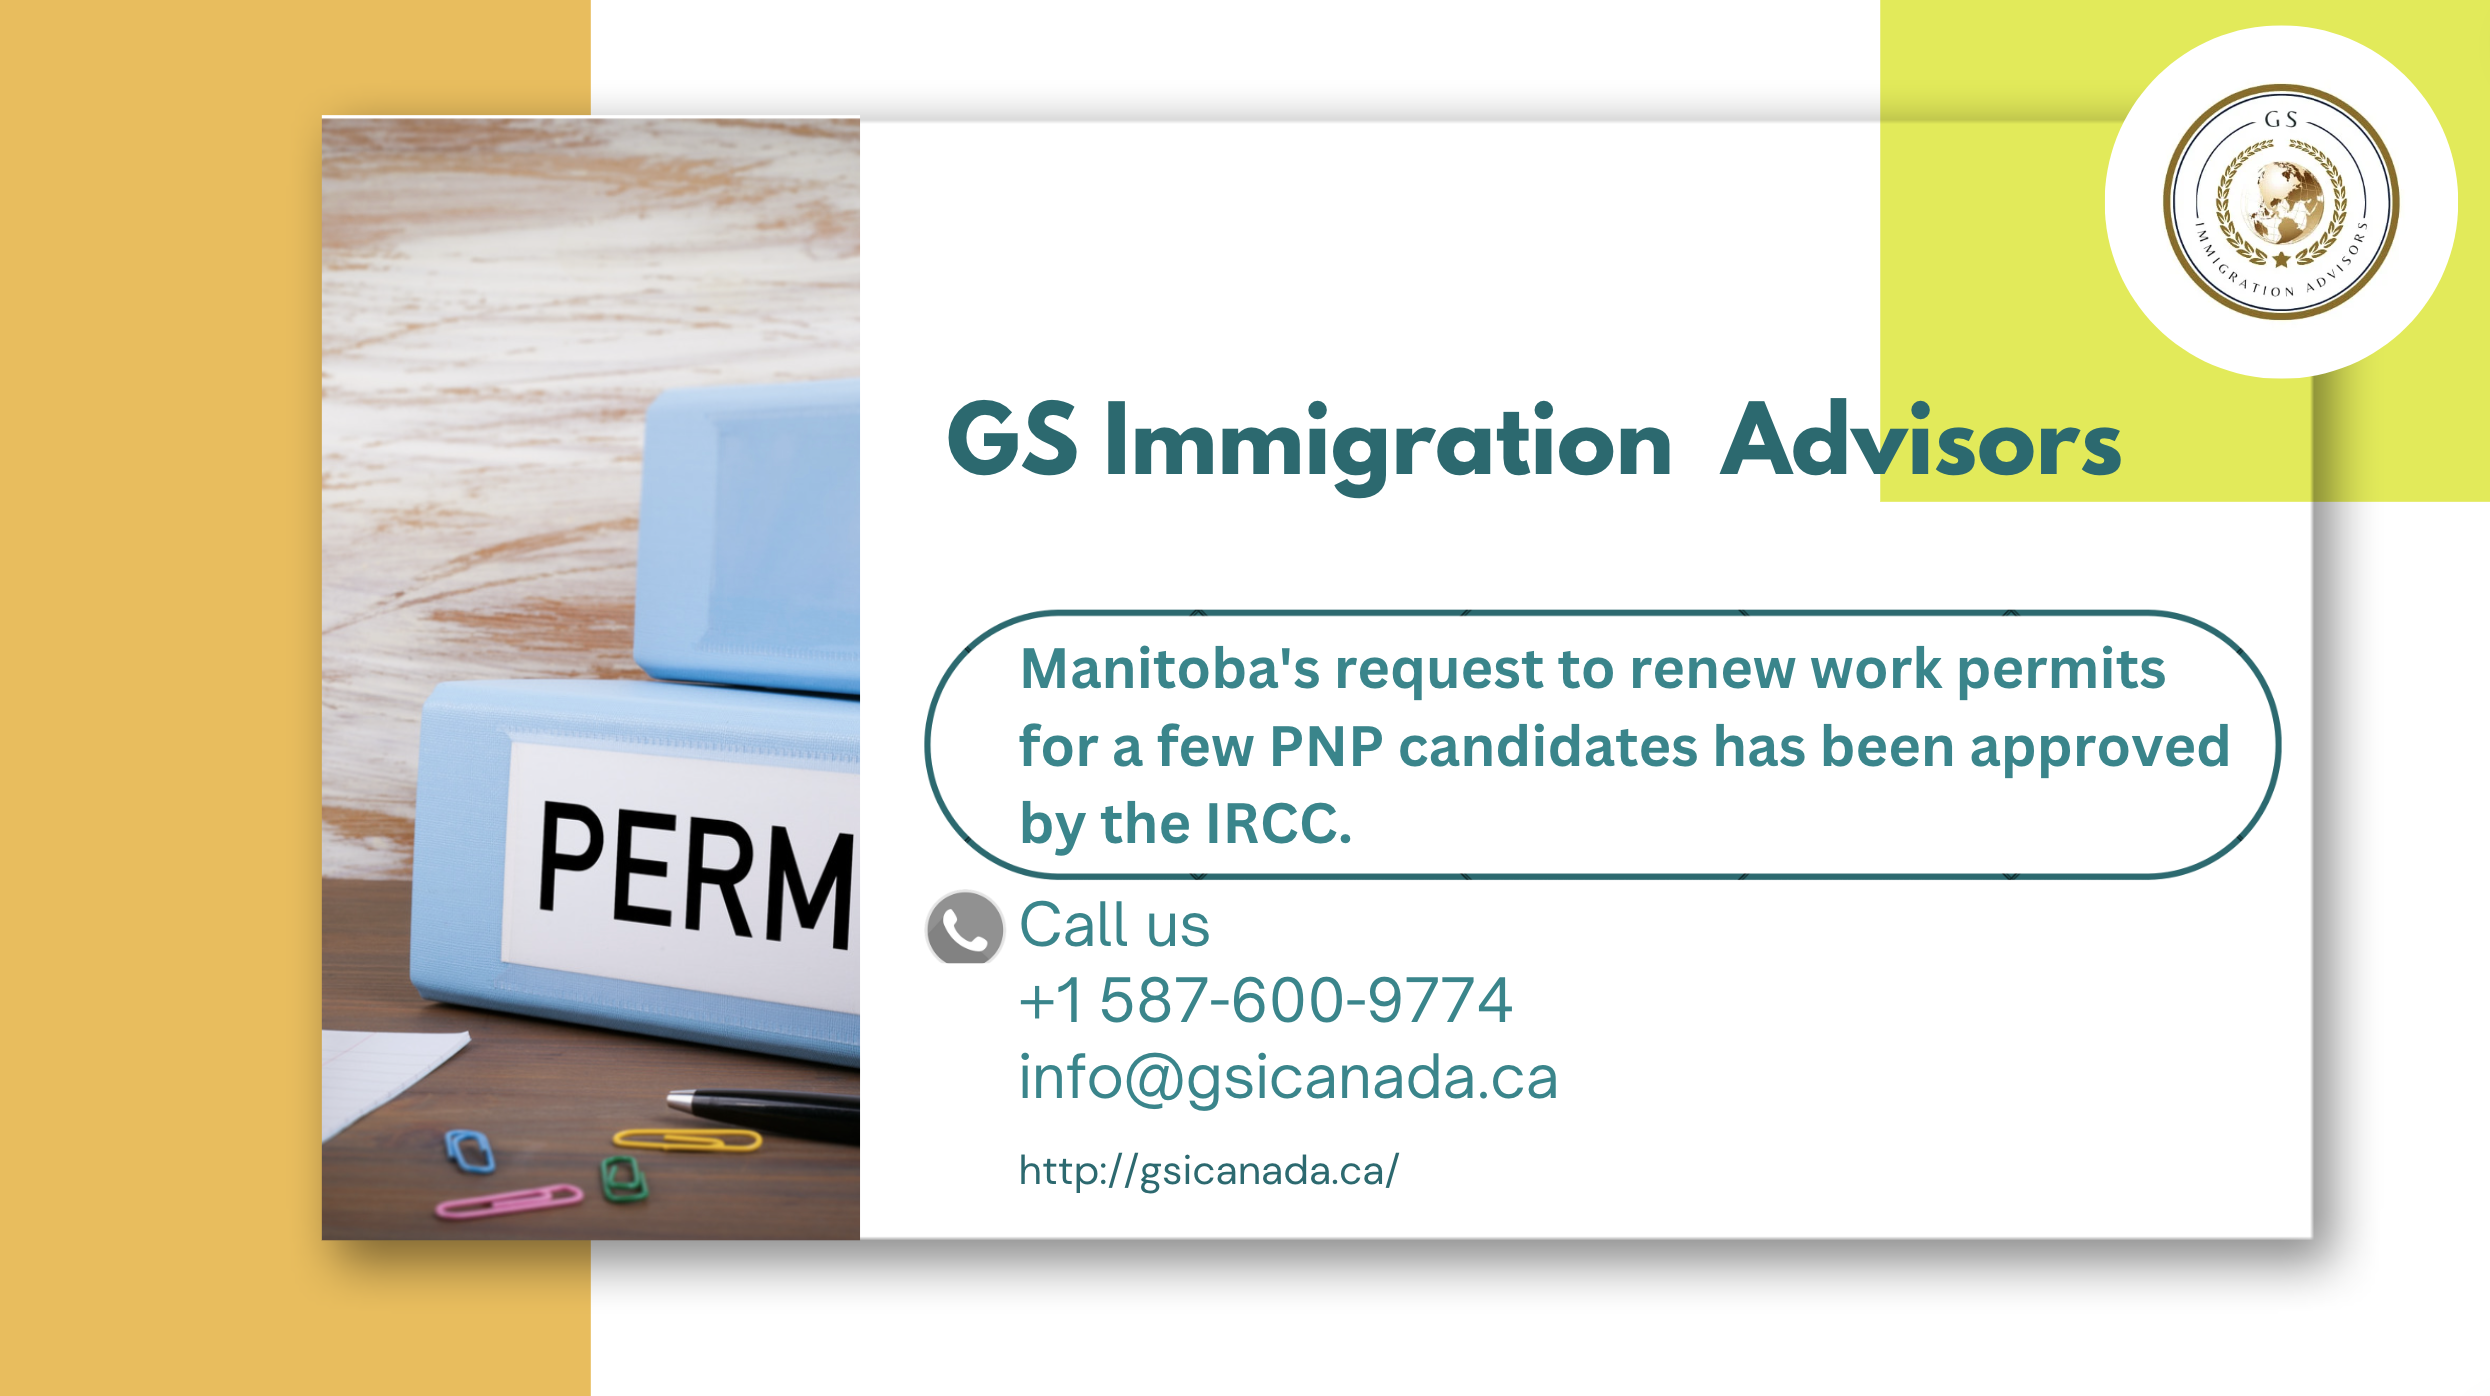 Manitoba’s request to renew work permits for a few PNP candidates has been approved by the IRCC.